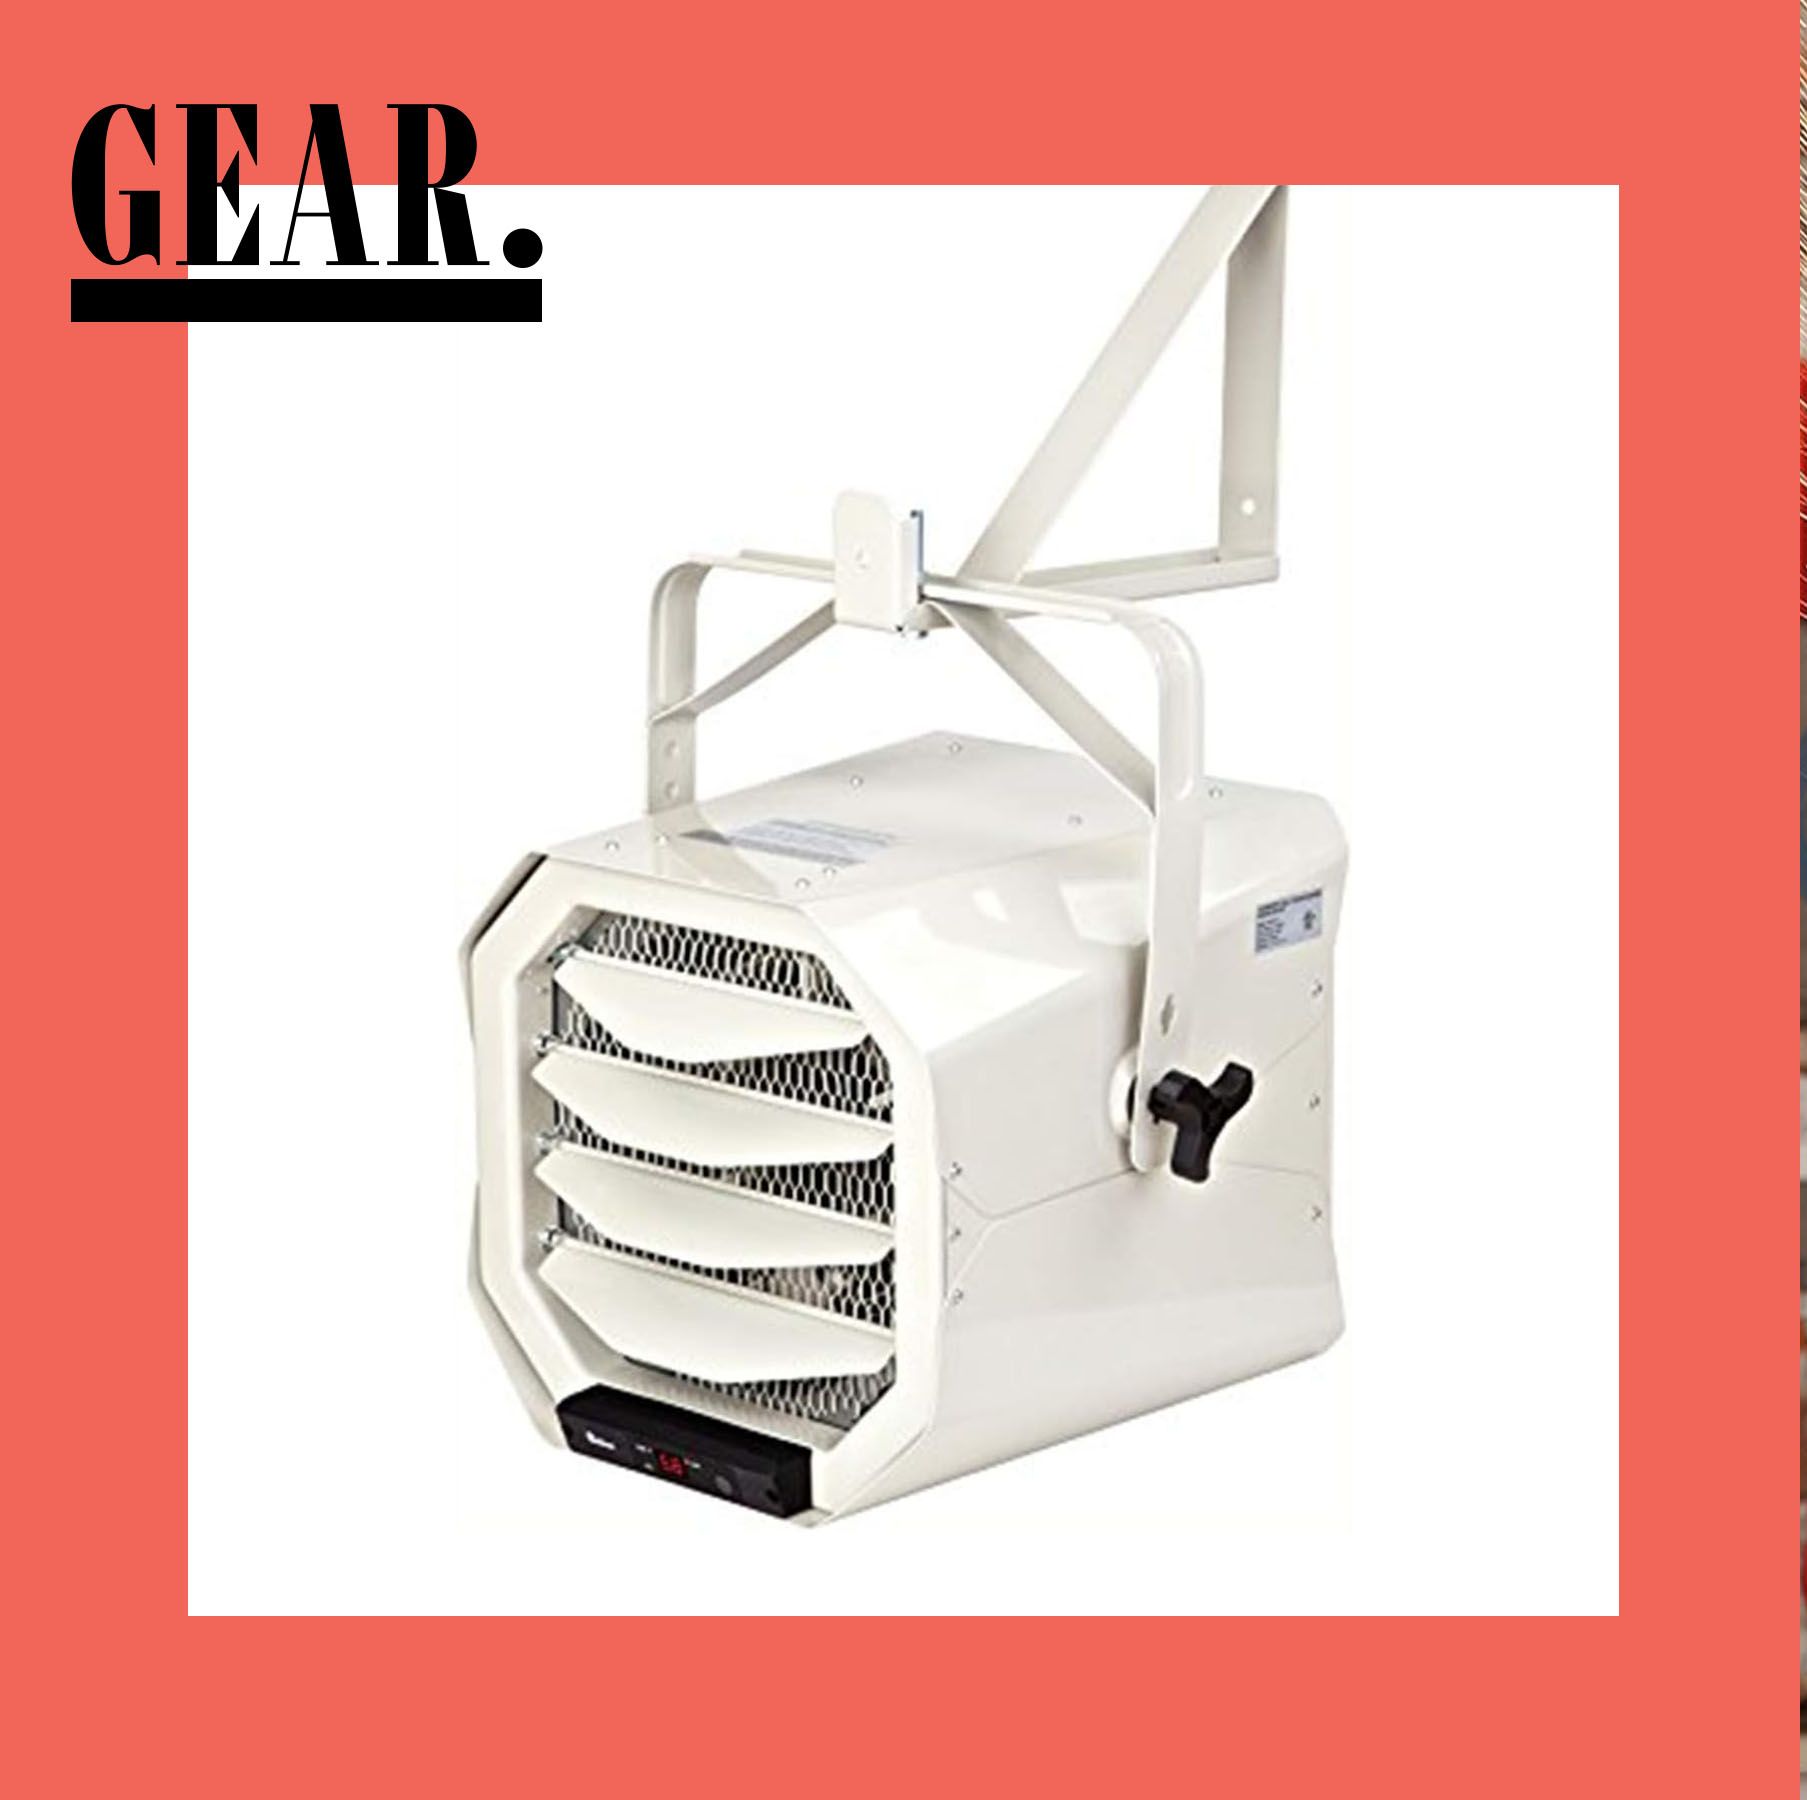 Frigid Wrenching? Keep Your Garage Warm This Winter With a Top-Rated Space Heaters